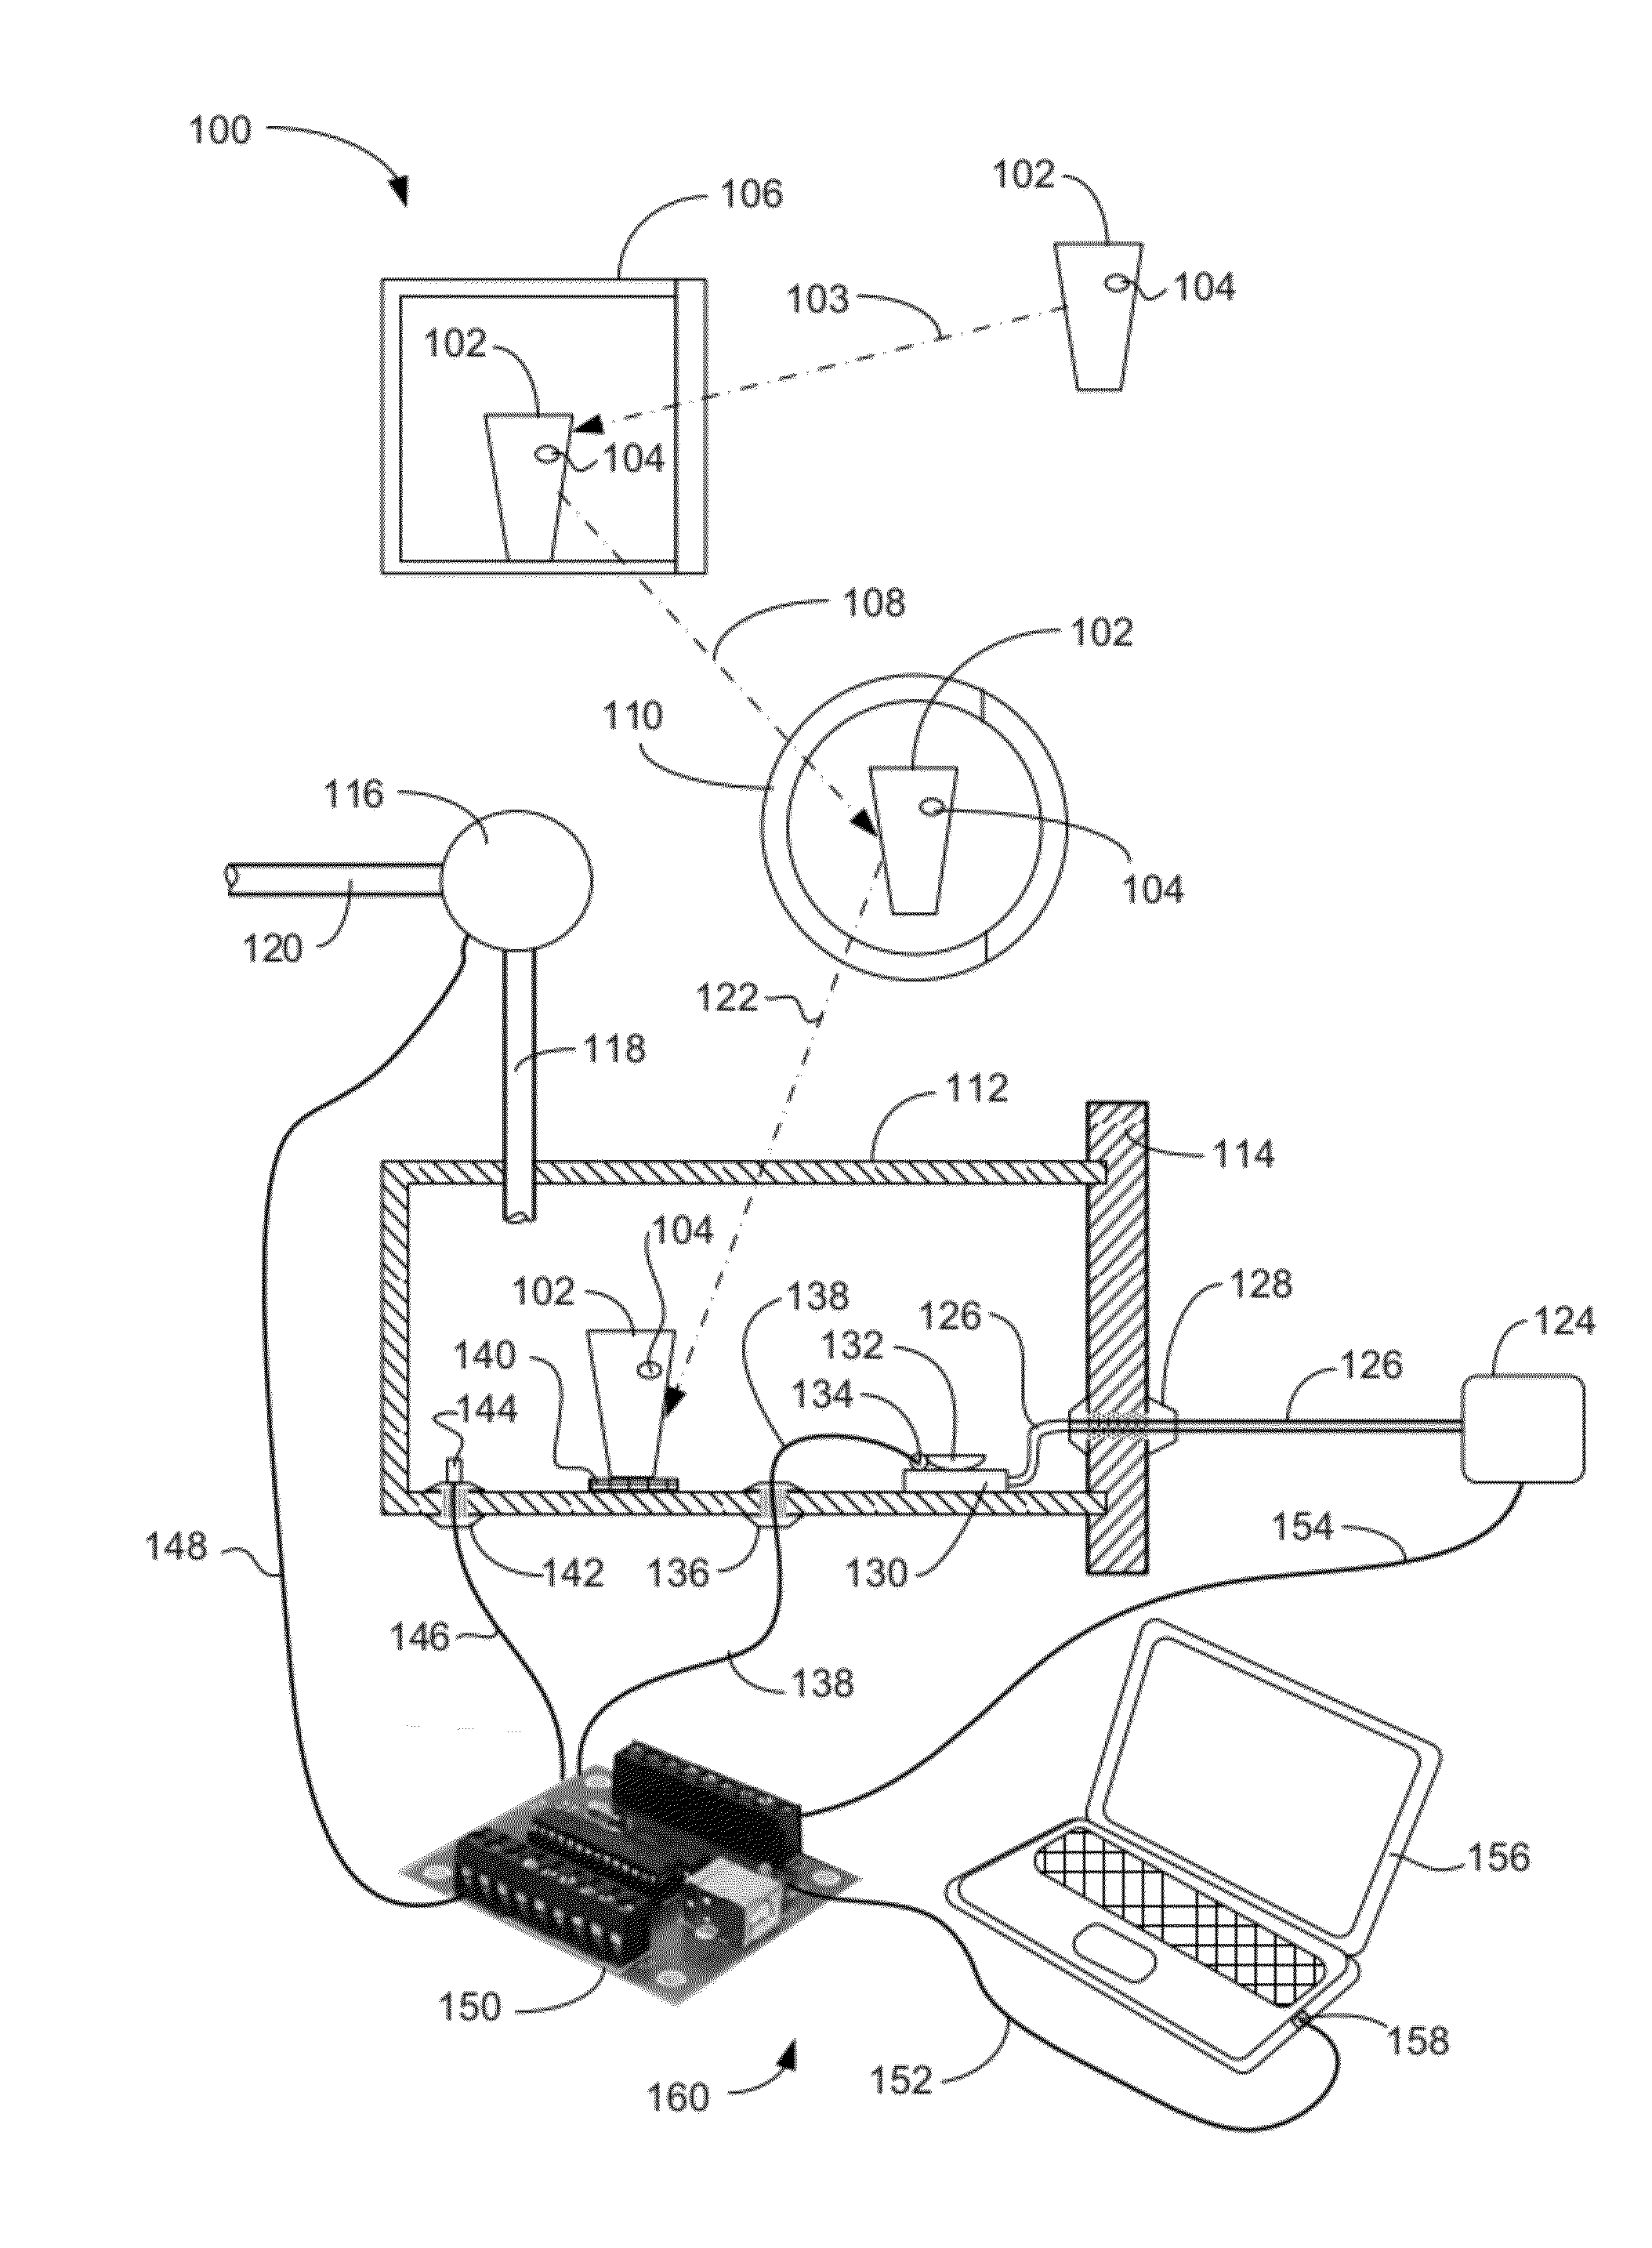 Apparatus and method for improved recovery of latent fingerprints